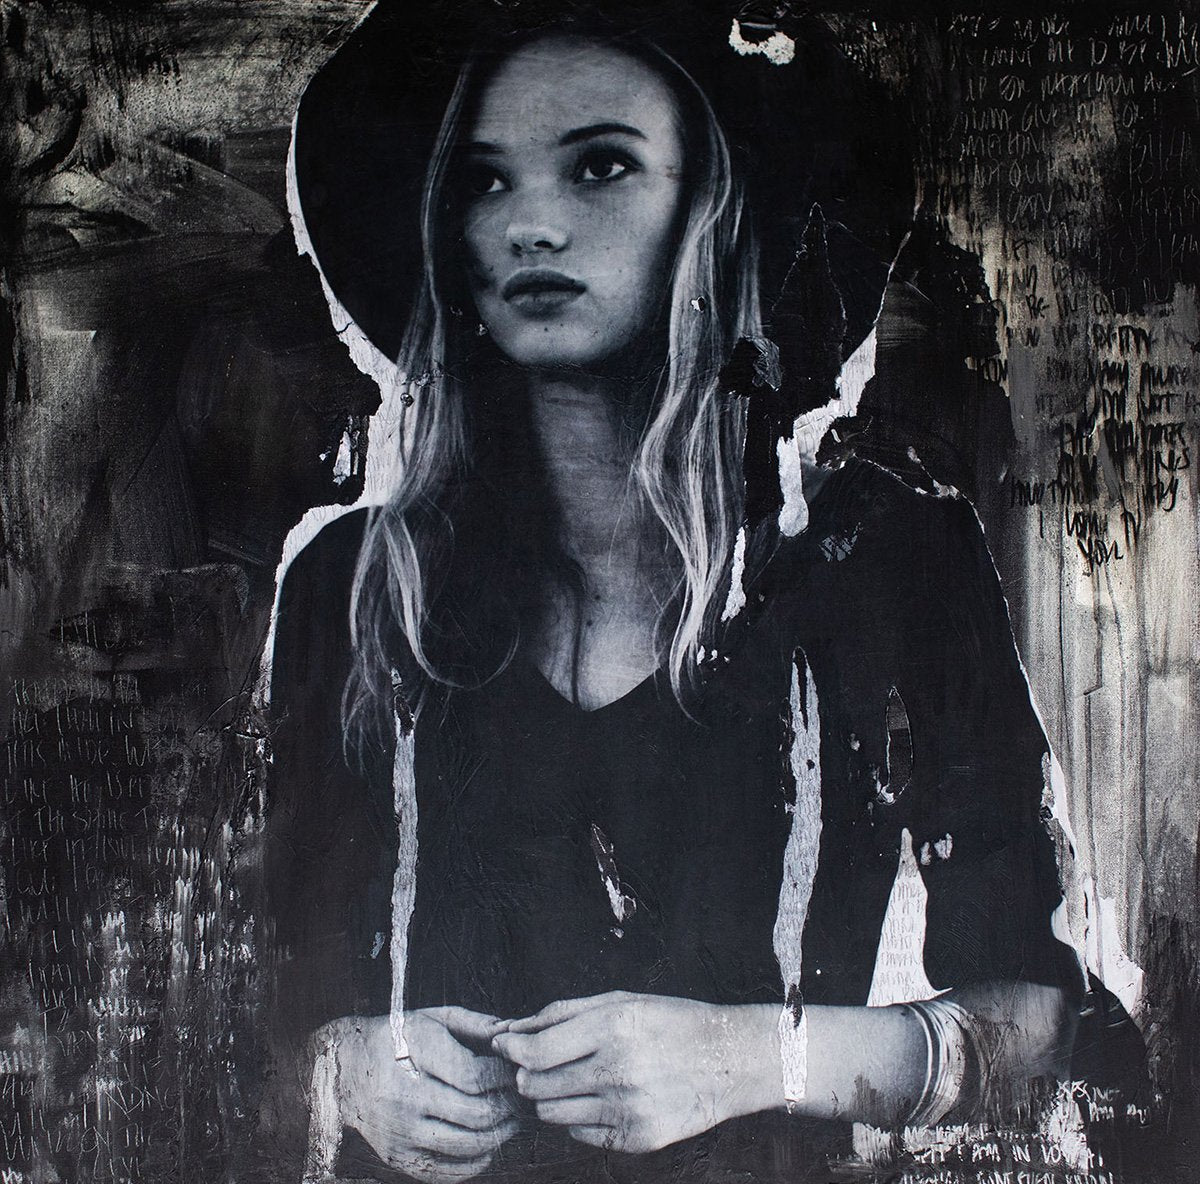 Street Art-Derby Hat For A Dark Day

“Derby Hat for a Dark Day” is a street art portrait painting featuring original portrait photography. It’s produced using collage-style on stretched canvas. This is a hand-signed piece with a certificate of authenticity.